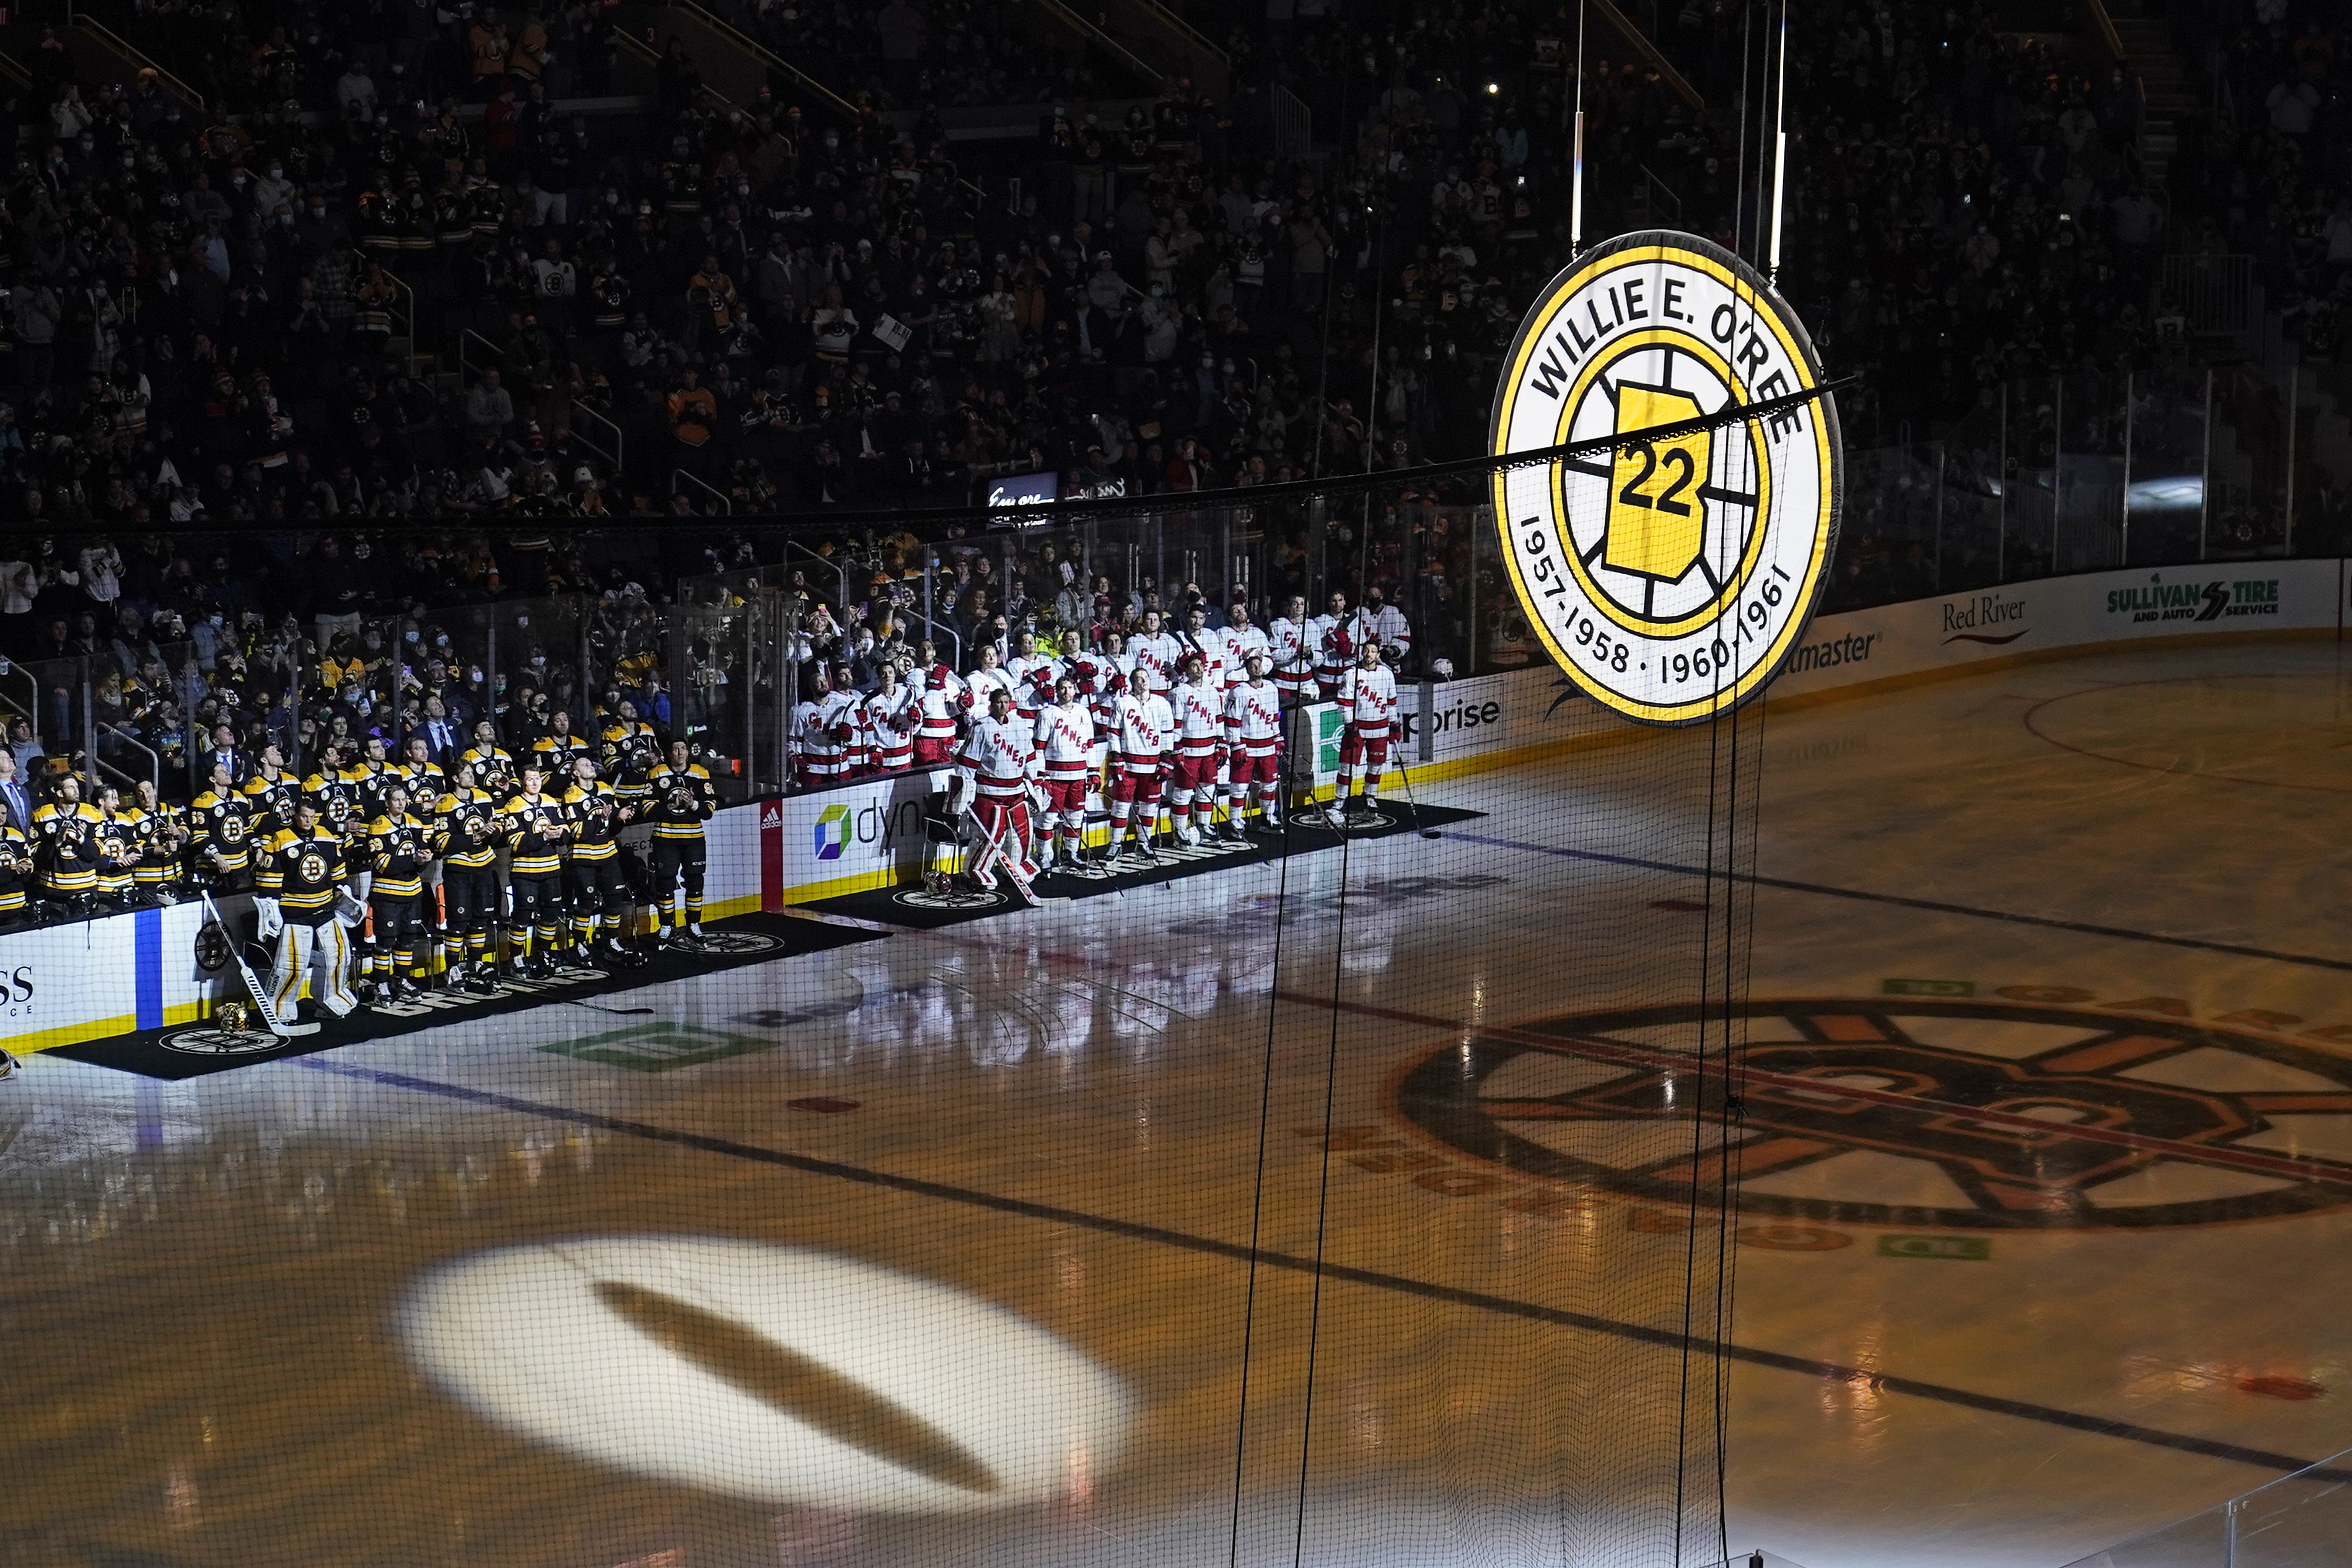 Bruins retiring jersey of Willie O'Ree, who broke NHL colour